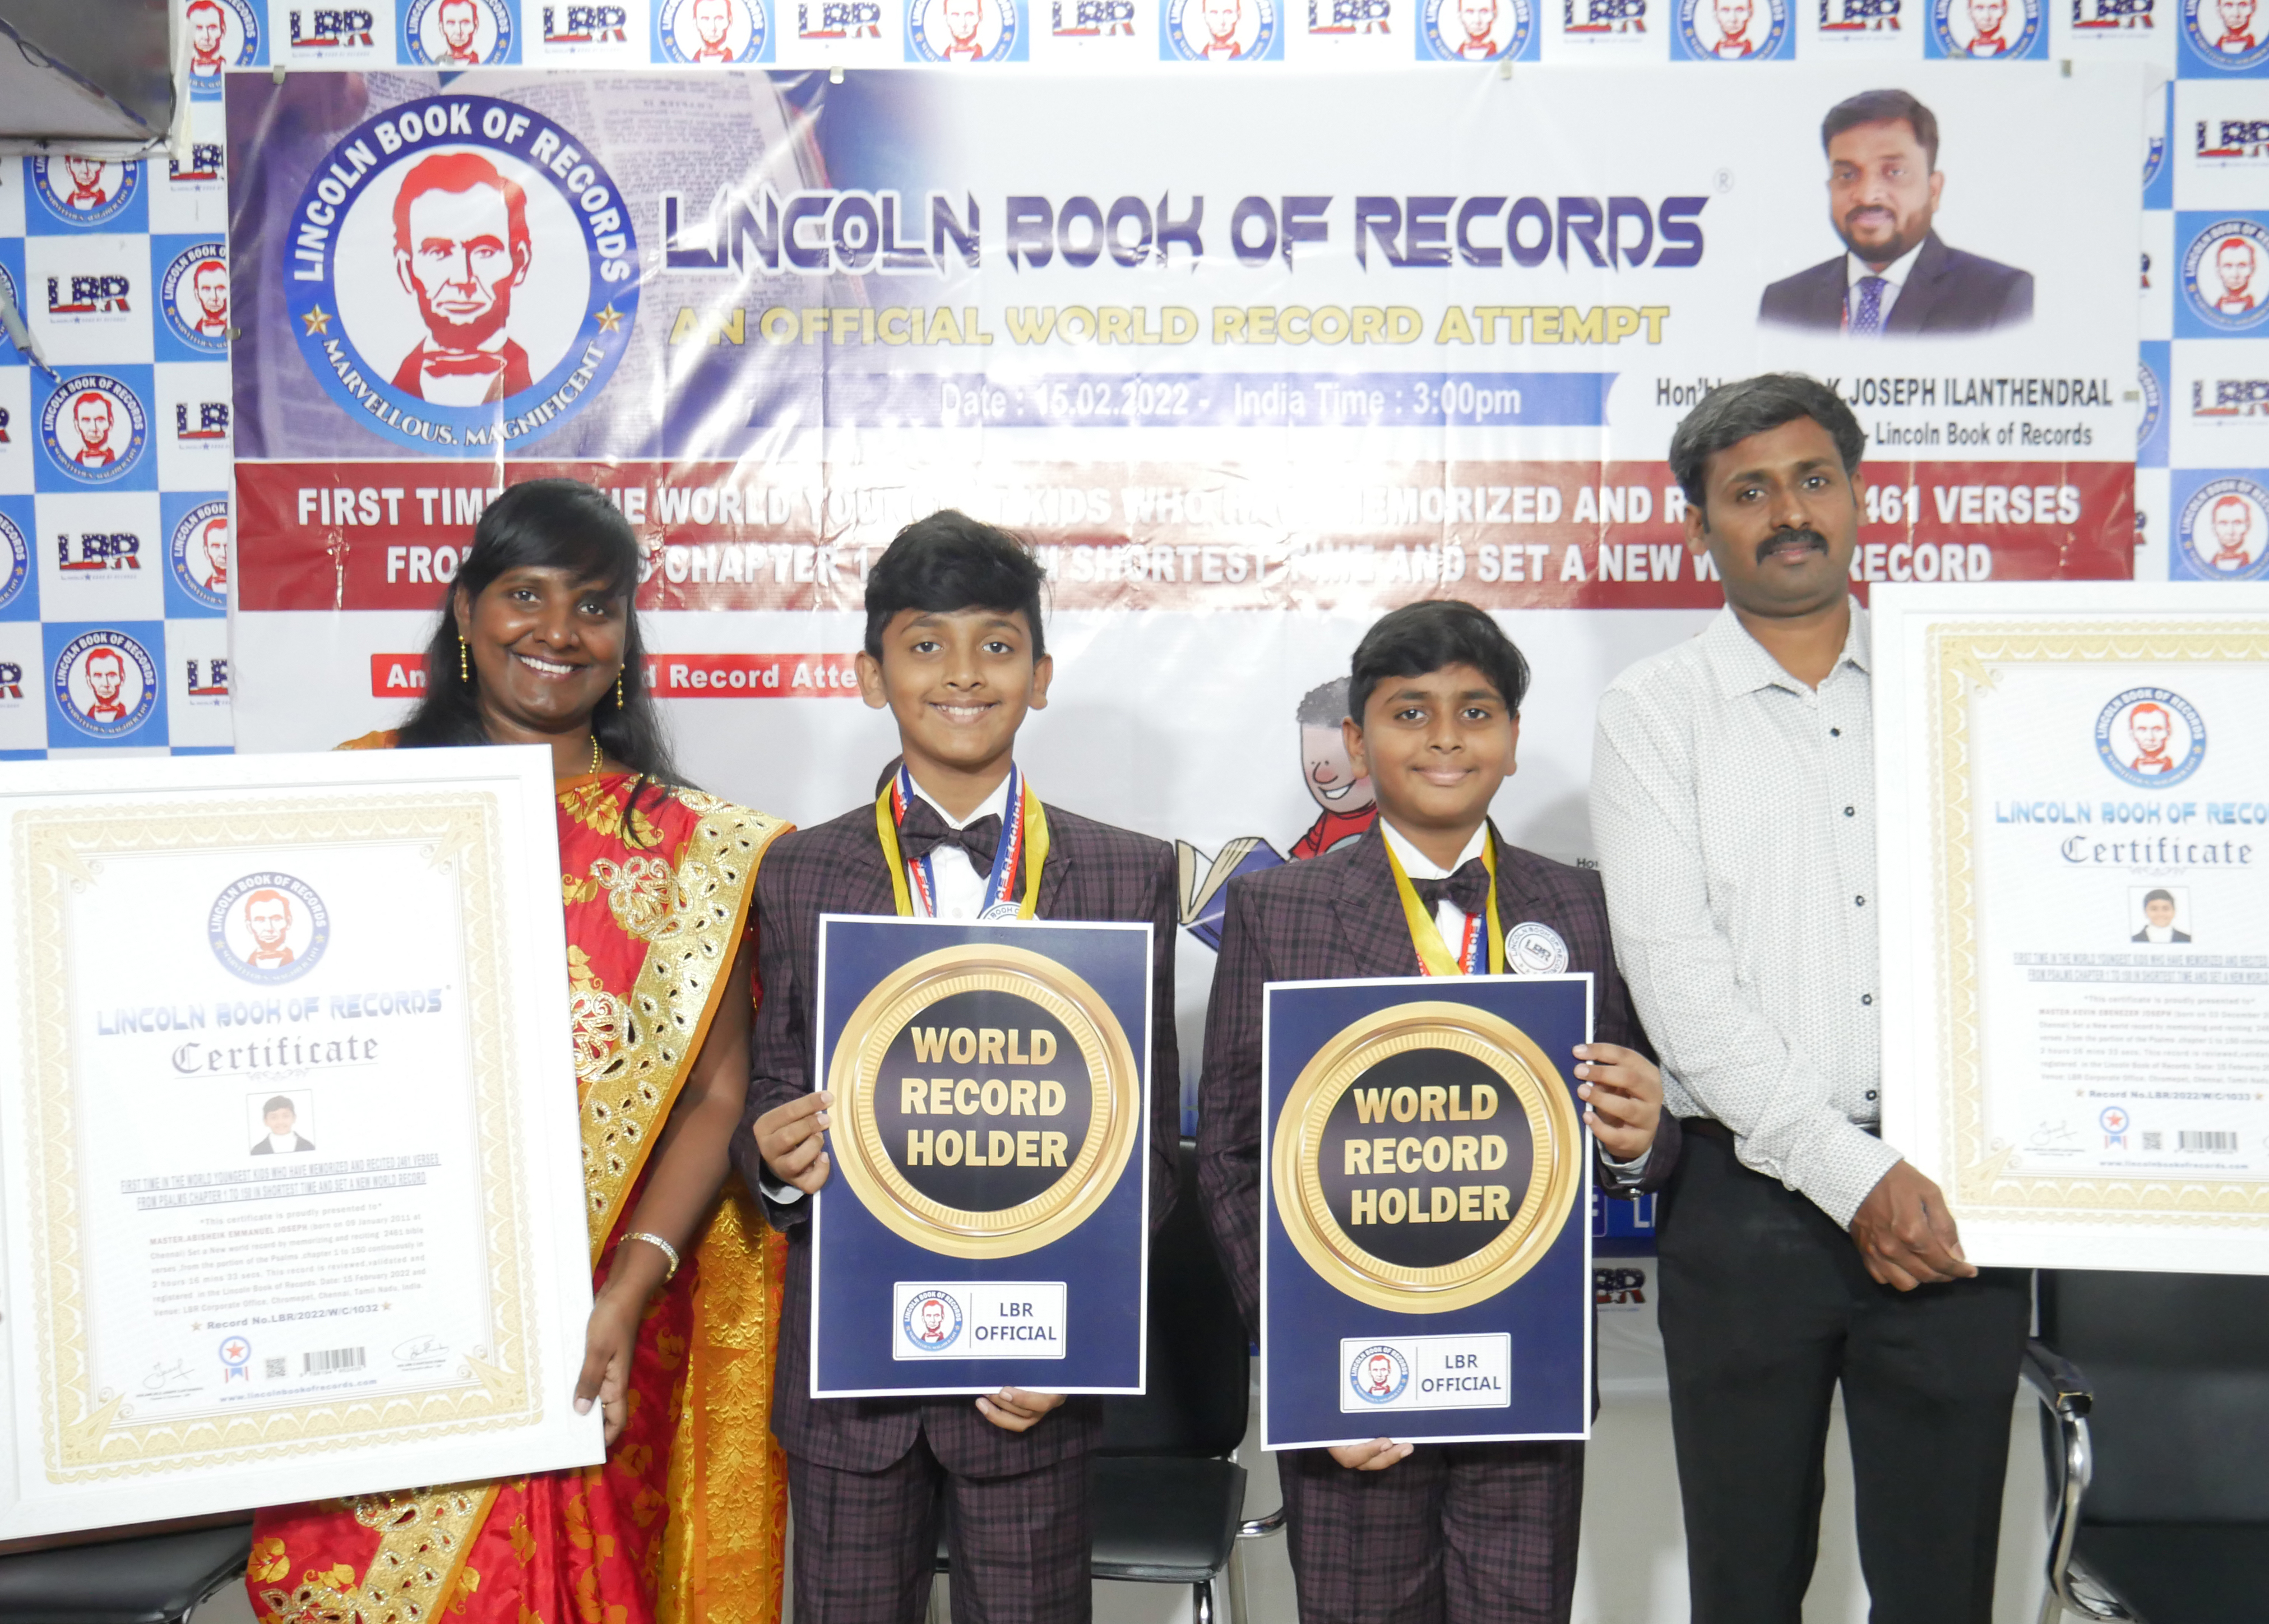 First time in the world youngest Kids who have memorized and recited 2461 Verses  from Psalms chapter 1 to 150 in shortest time and set a New World record